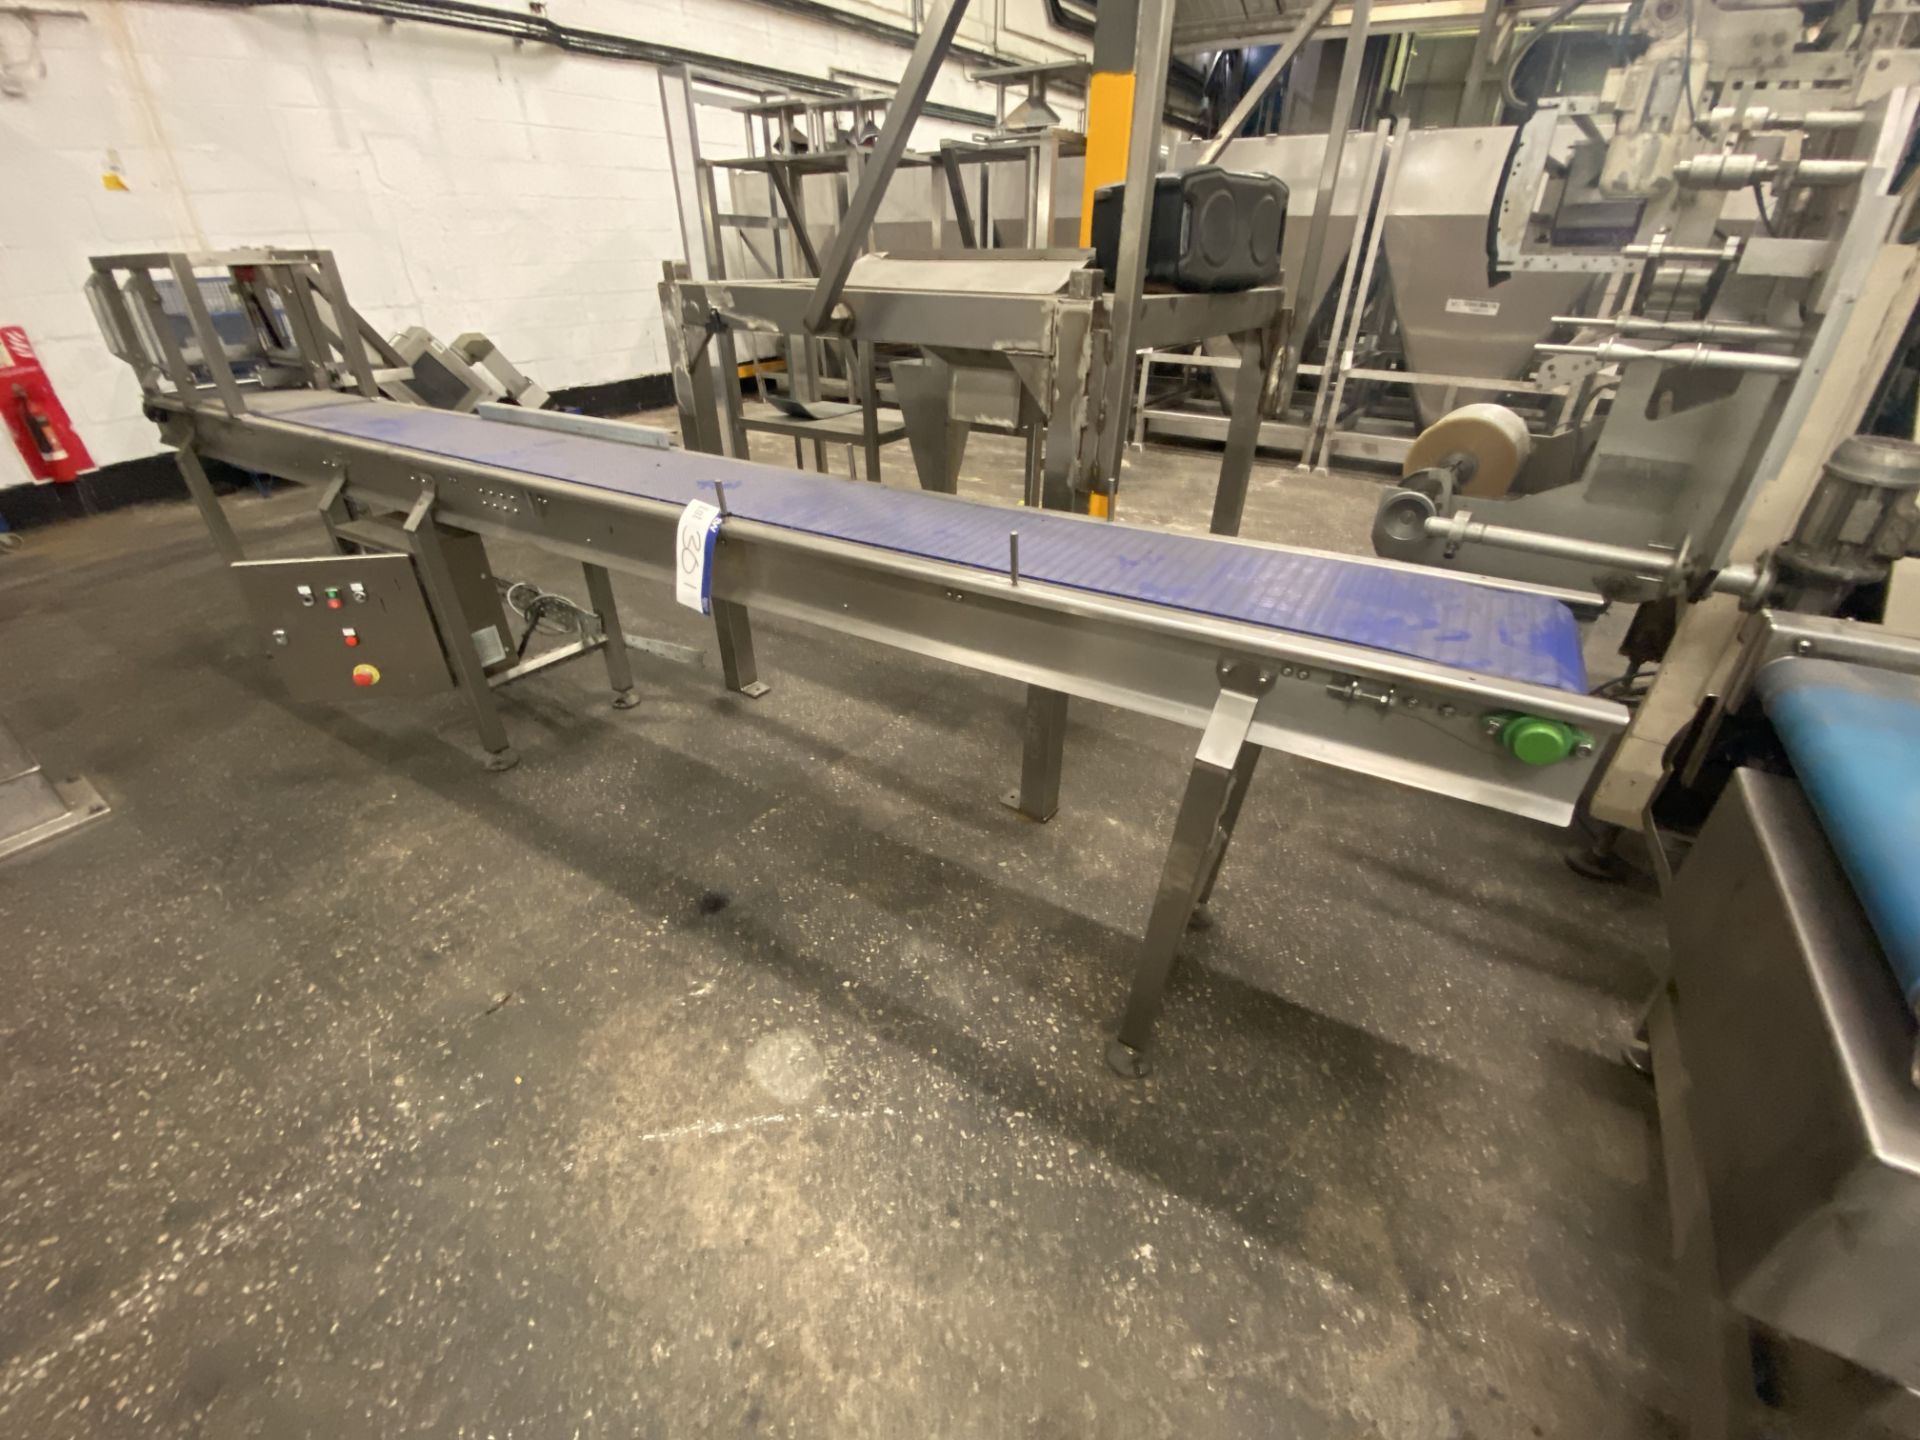 Stainless Steel Framed Plastic Belt Conveyor, approx. 4.2m centres long x 300mm wide on belt, with - Image 6 of 6